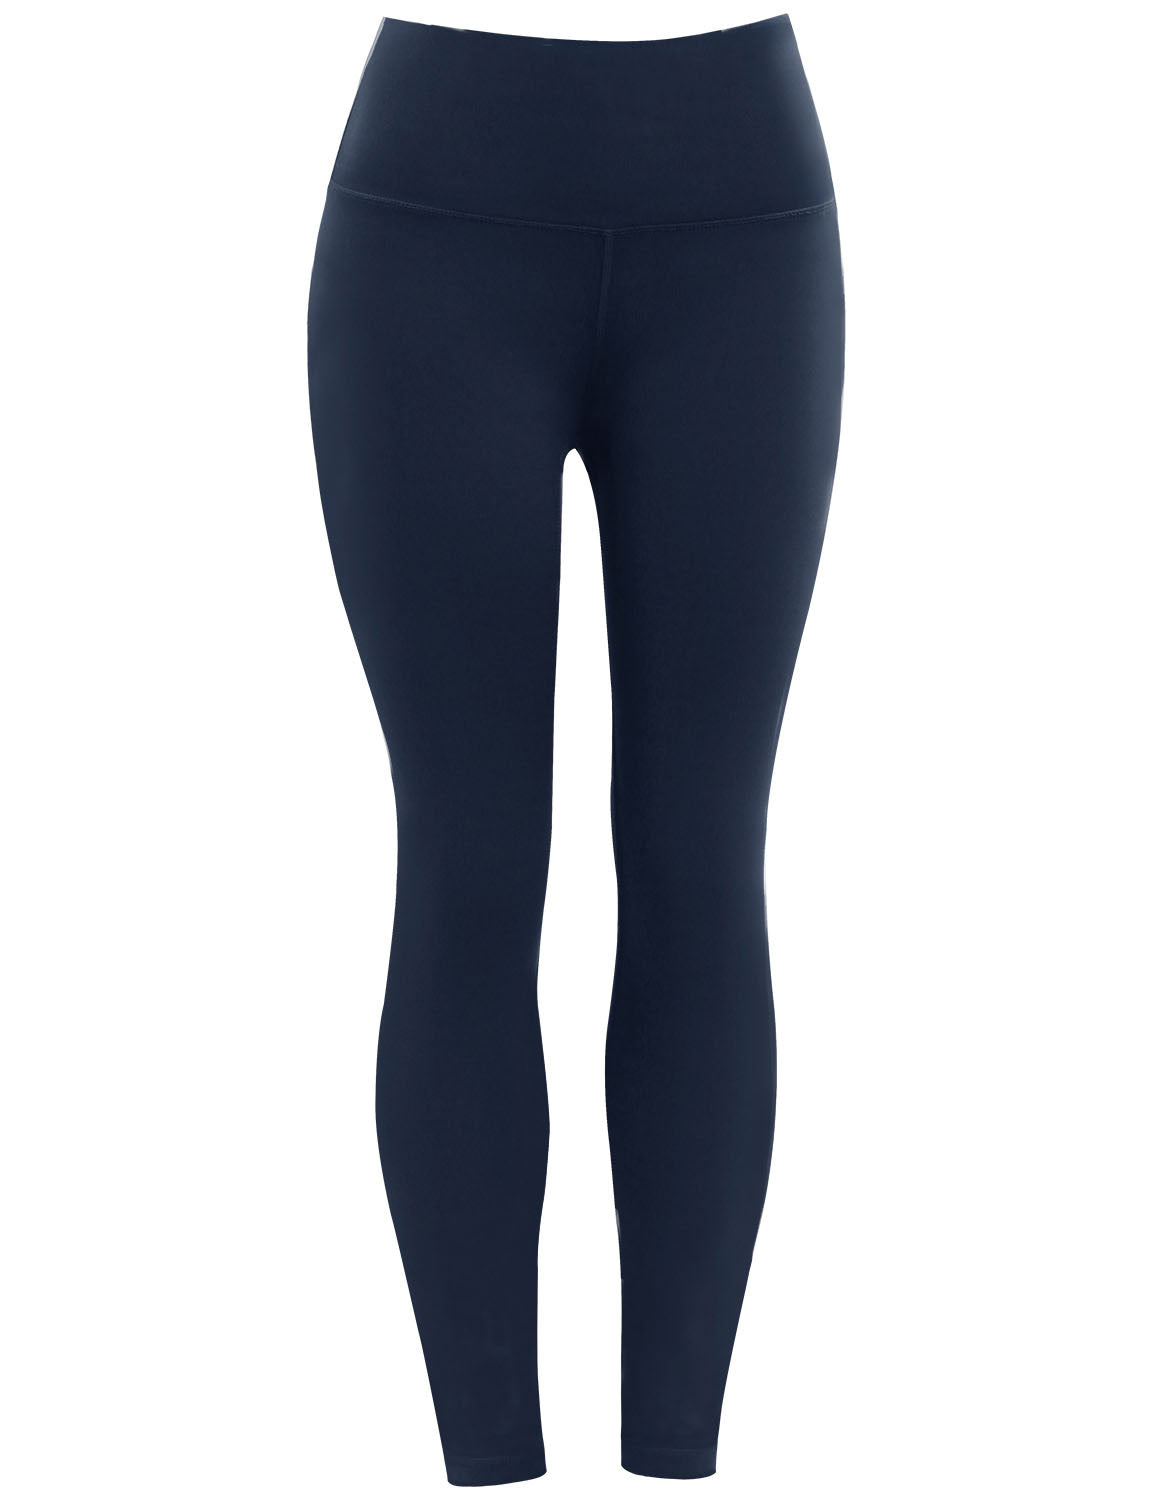 High Waist Jogging Pants darknavy 75%Nylon/25%Spandex Fabric doesn't attract lint easily 4-way stretch No see-through Moisture-wicking Tummy control Inner pocket Four lengths